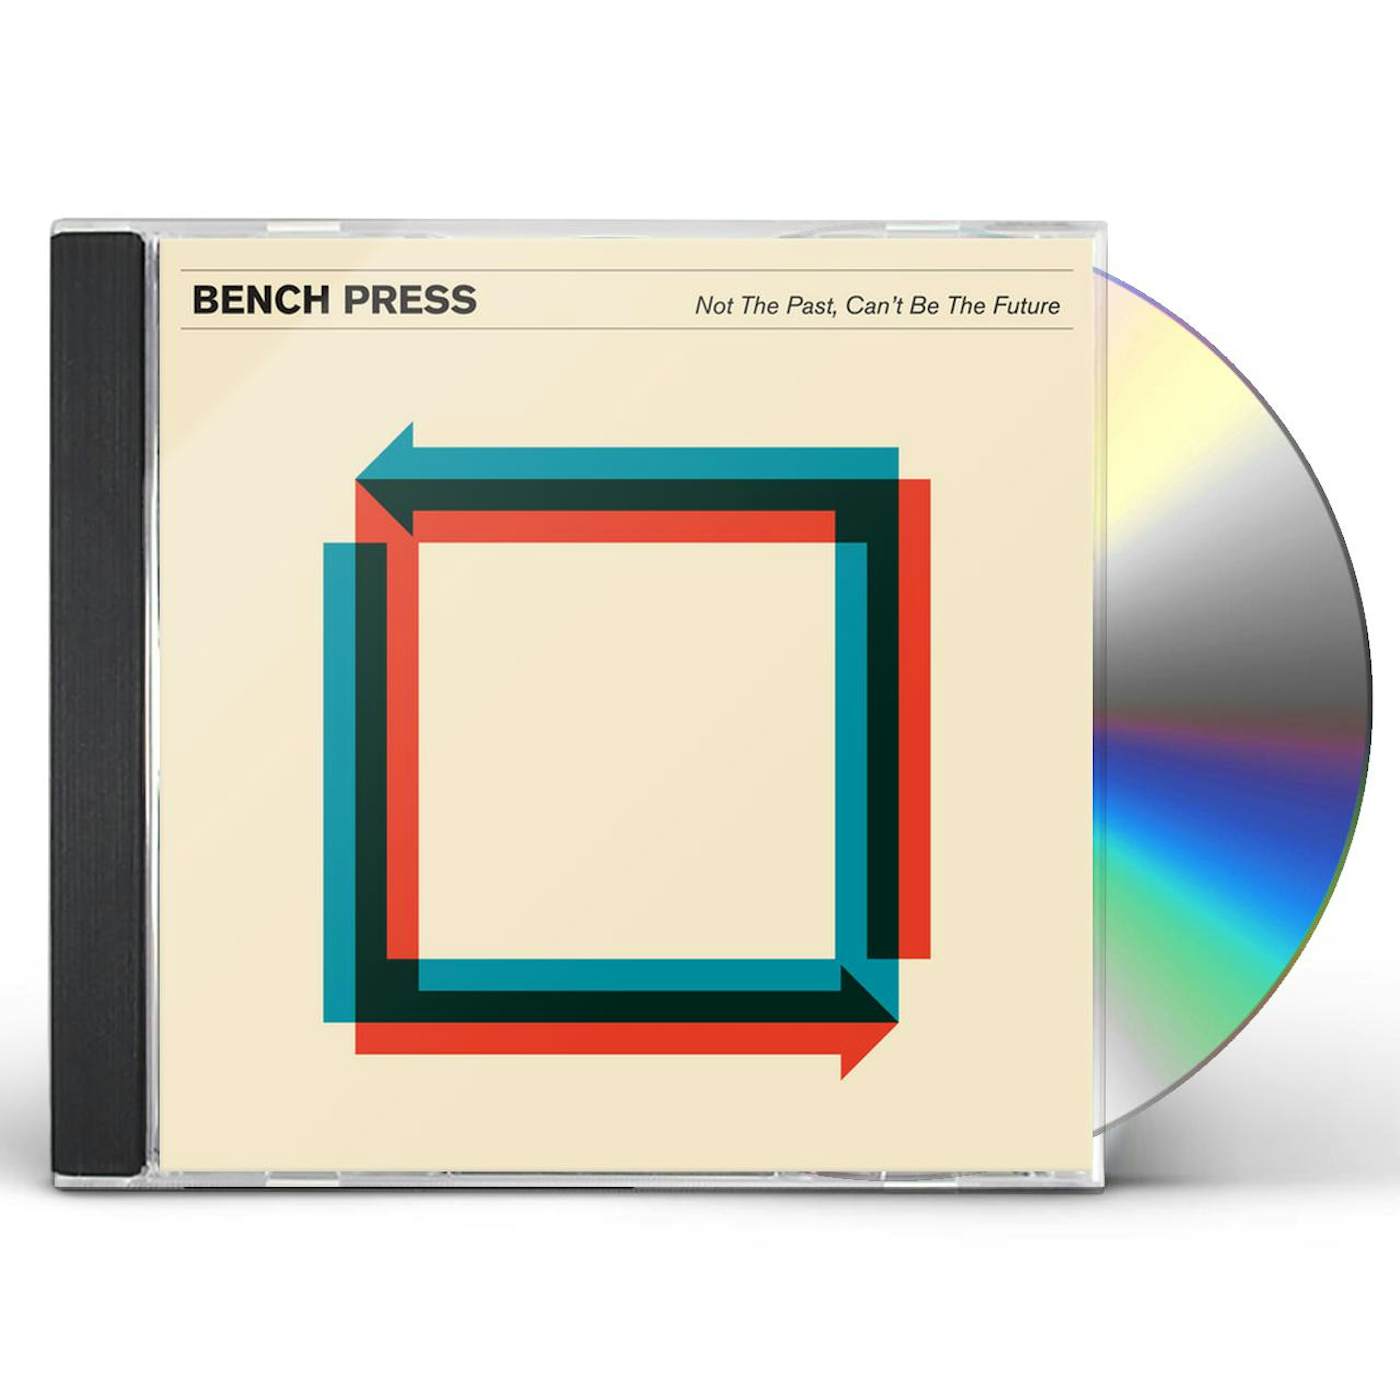 Bench Press NOT THE PAST CAN'T BE THE FUTURE CD